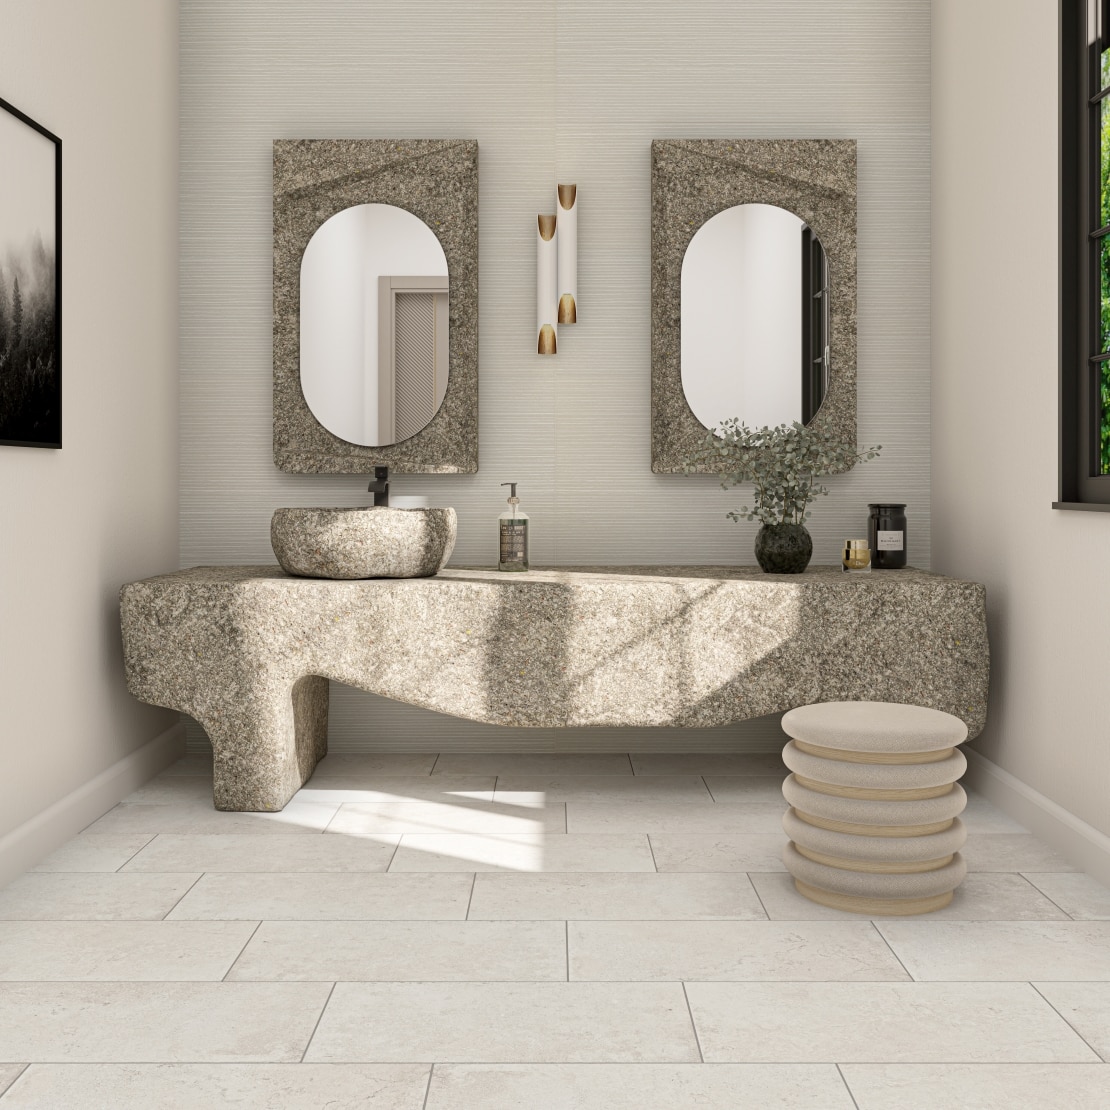 Residential bathroom with countertop craved from stone, monochromatic floors and matching pedestal.